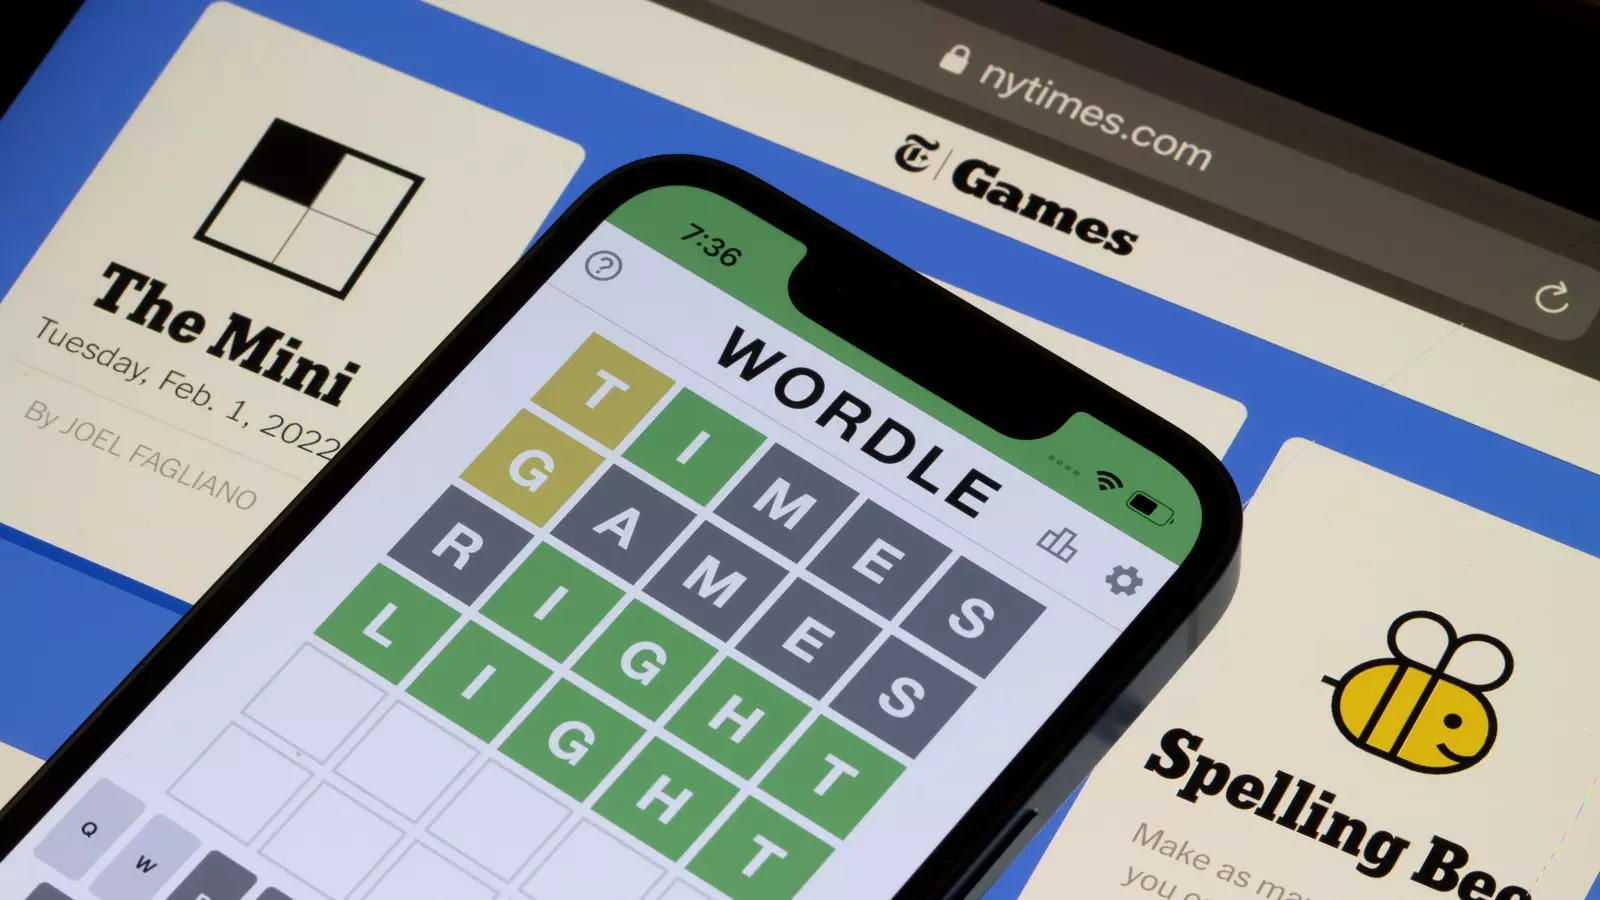 10 Games To Play Online If You Love Wordle